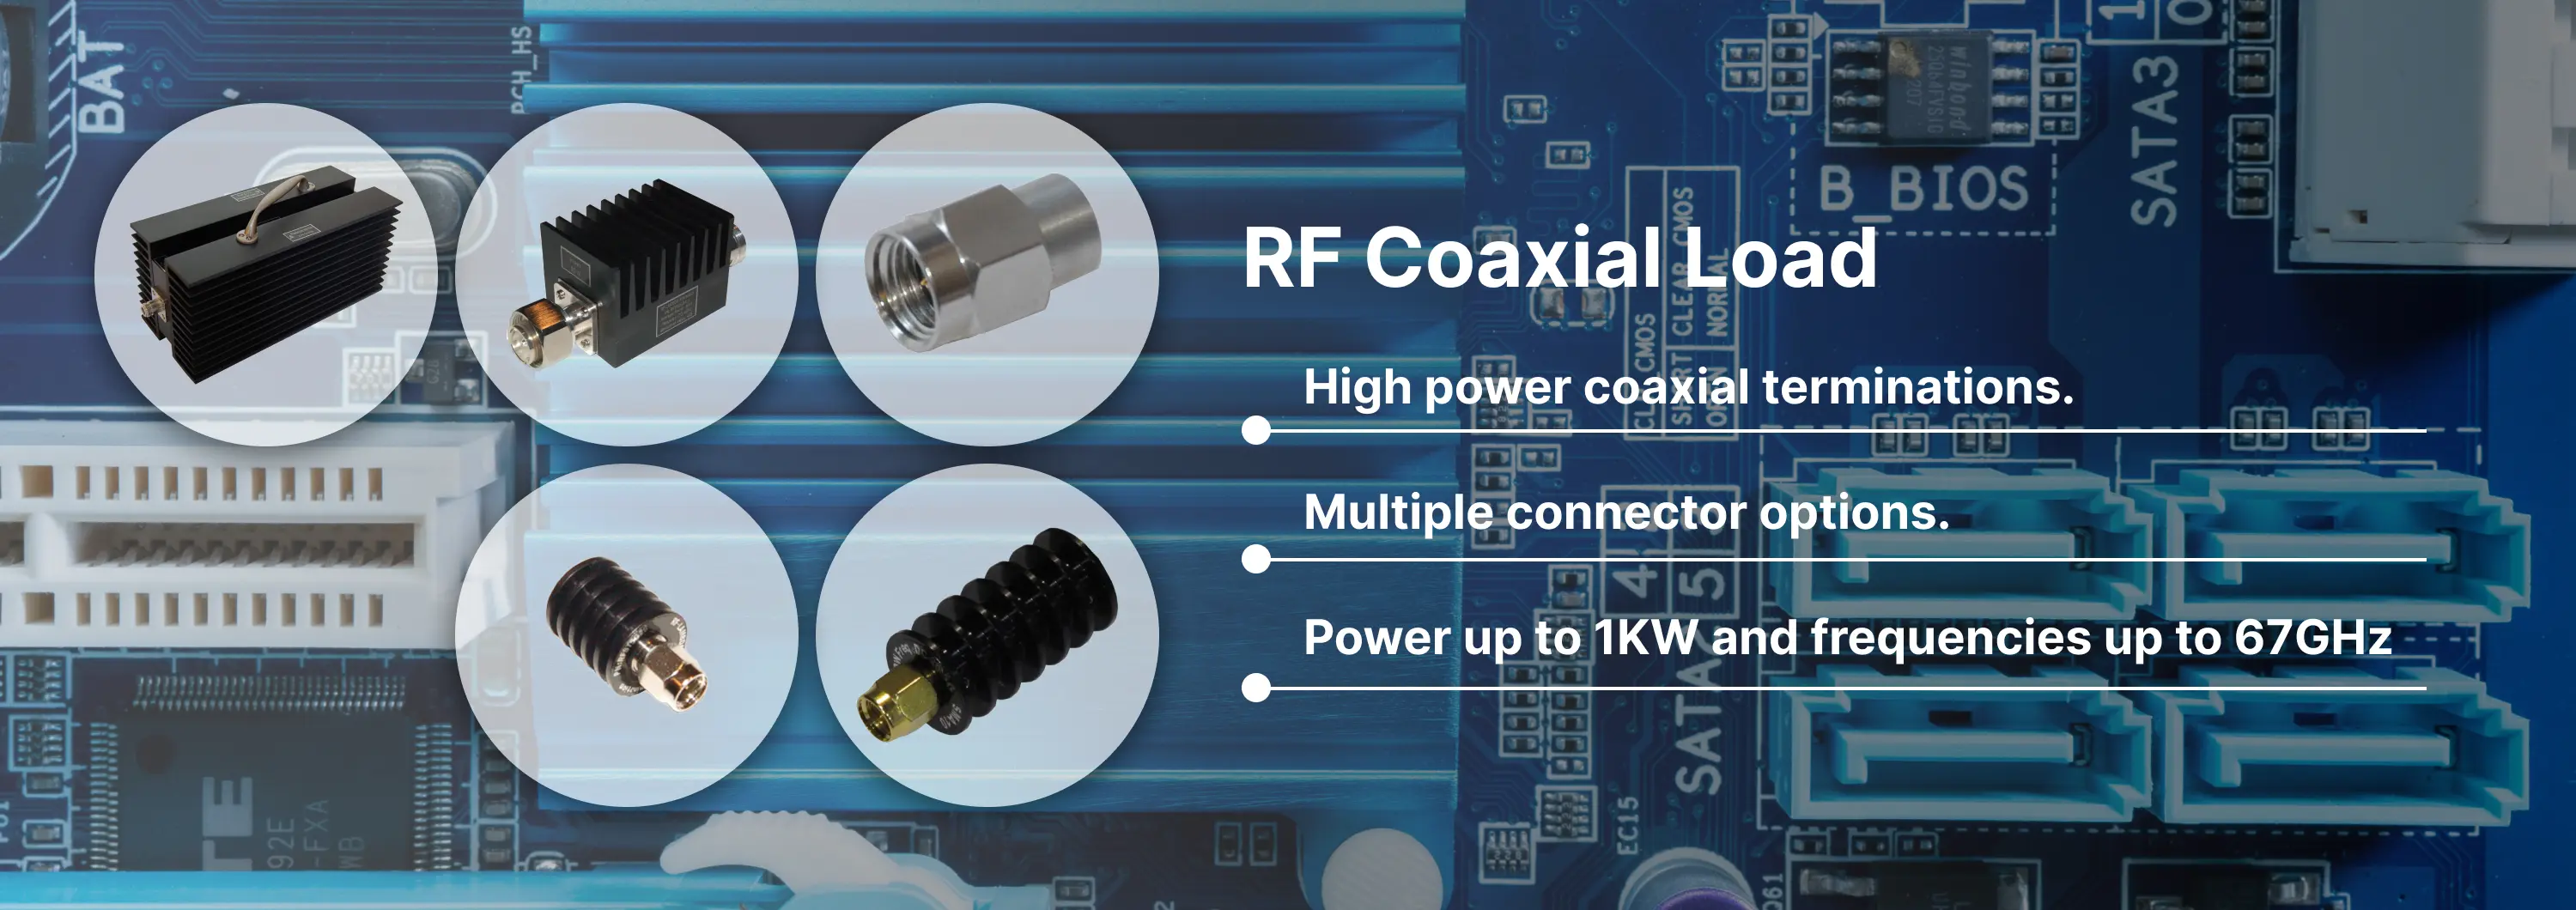 RF Coaxial Load Banner